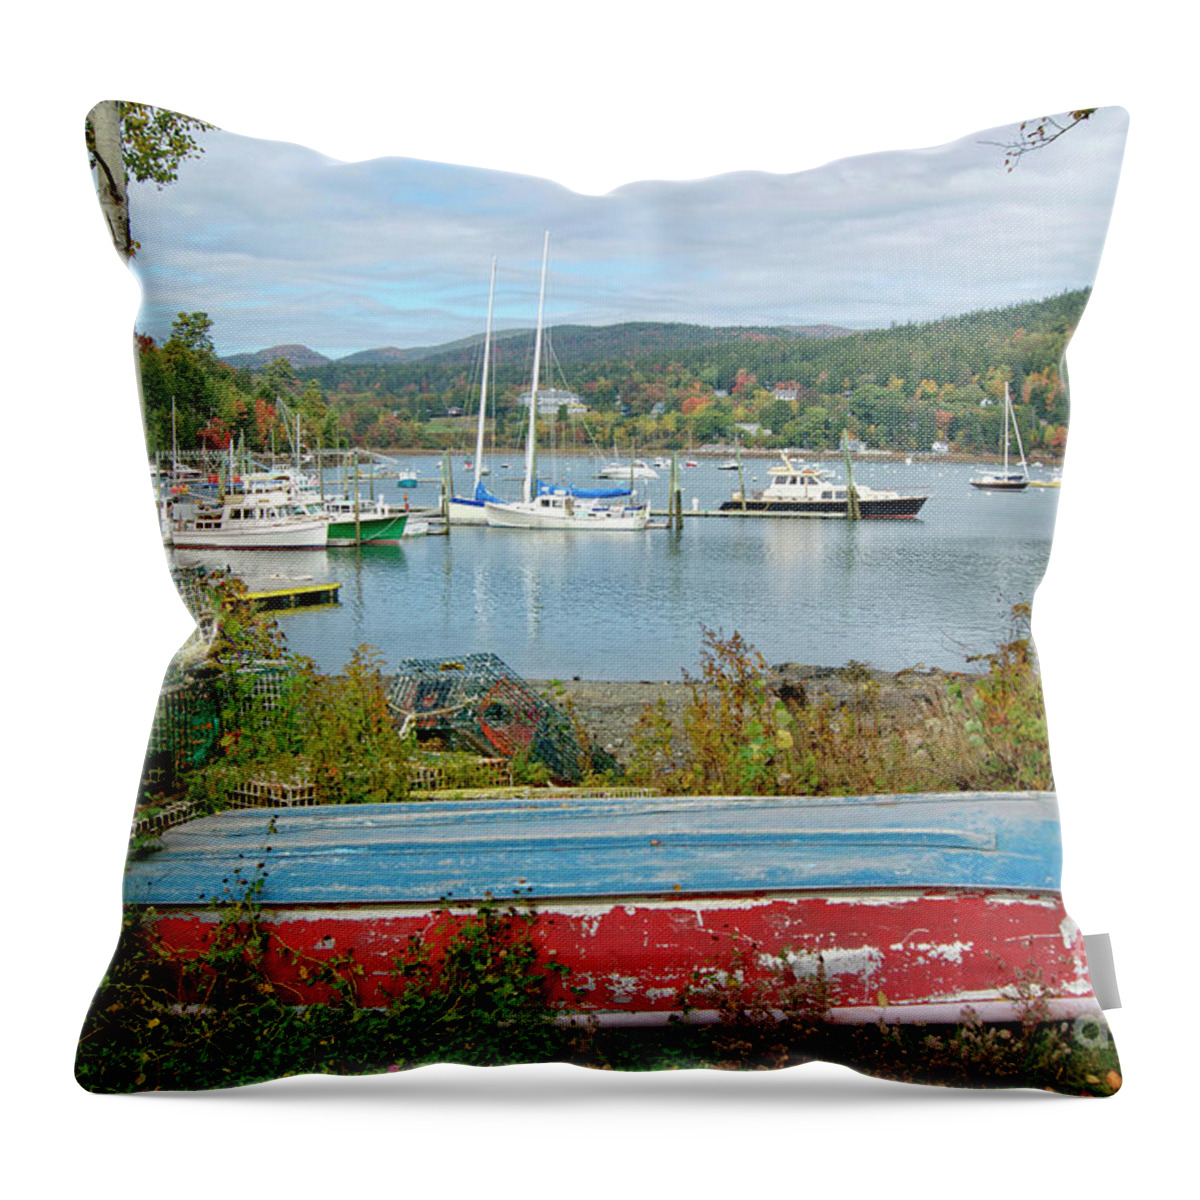 Northeast Harbor Throw Pillow featuring the photograph Northeast Harbor, Acadia National Park, Maine. by David Birchall